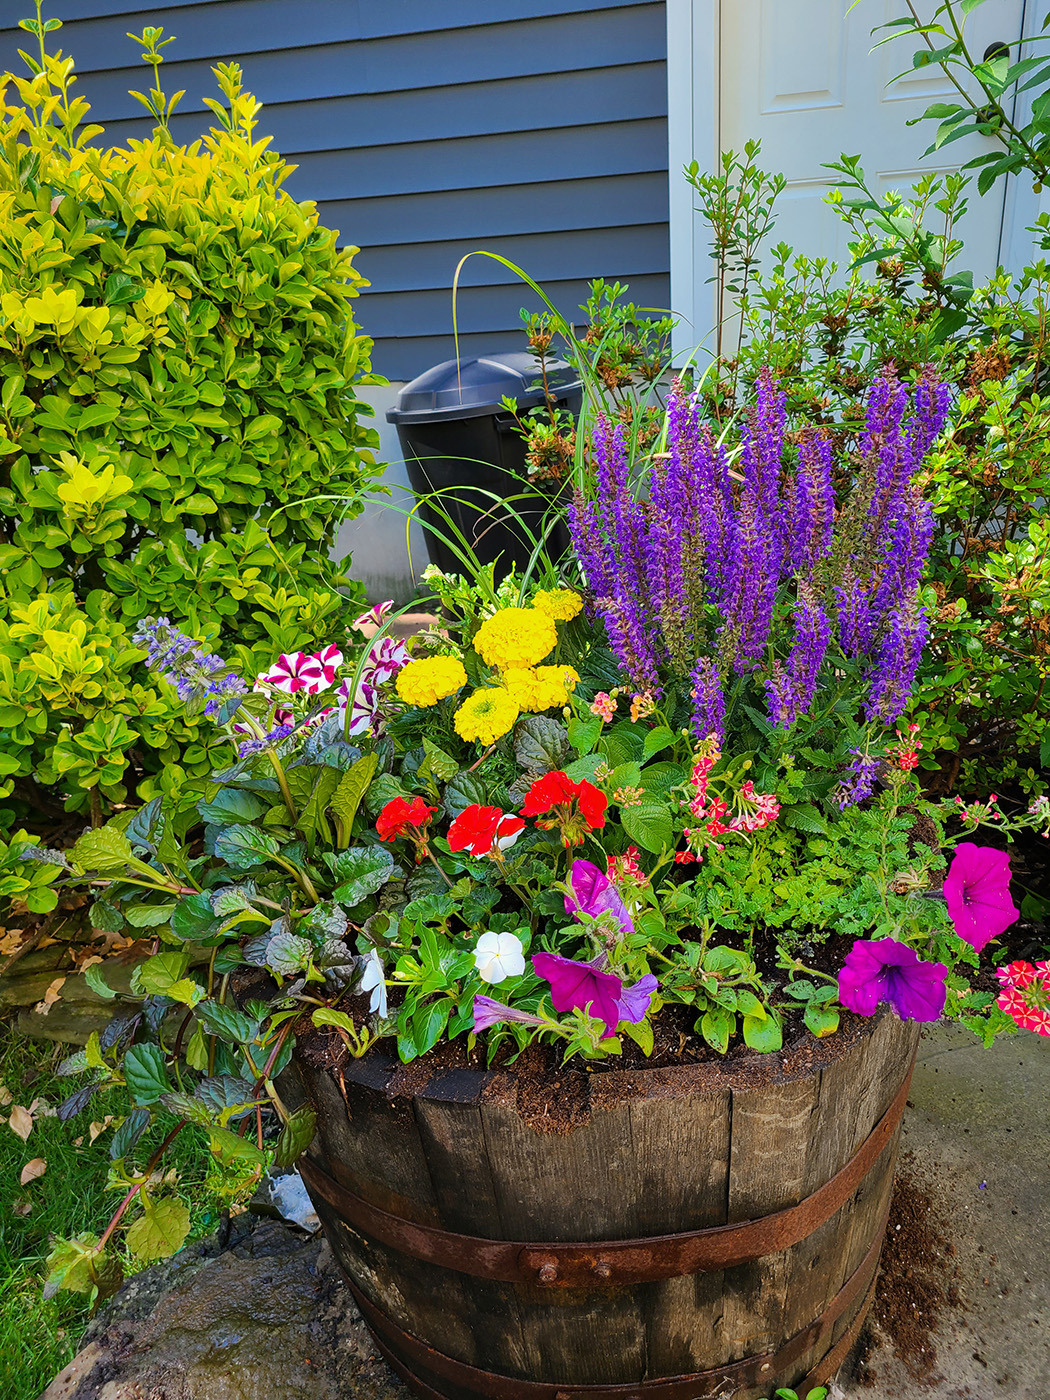 Custom Garden Containers at Goffle Brook Farms